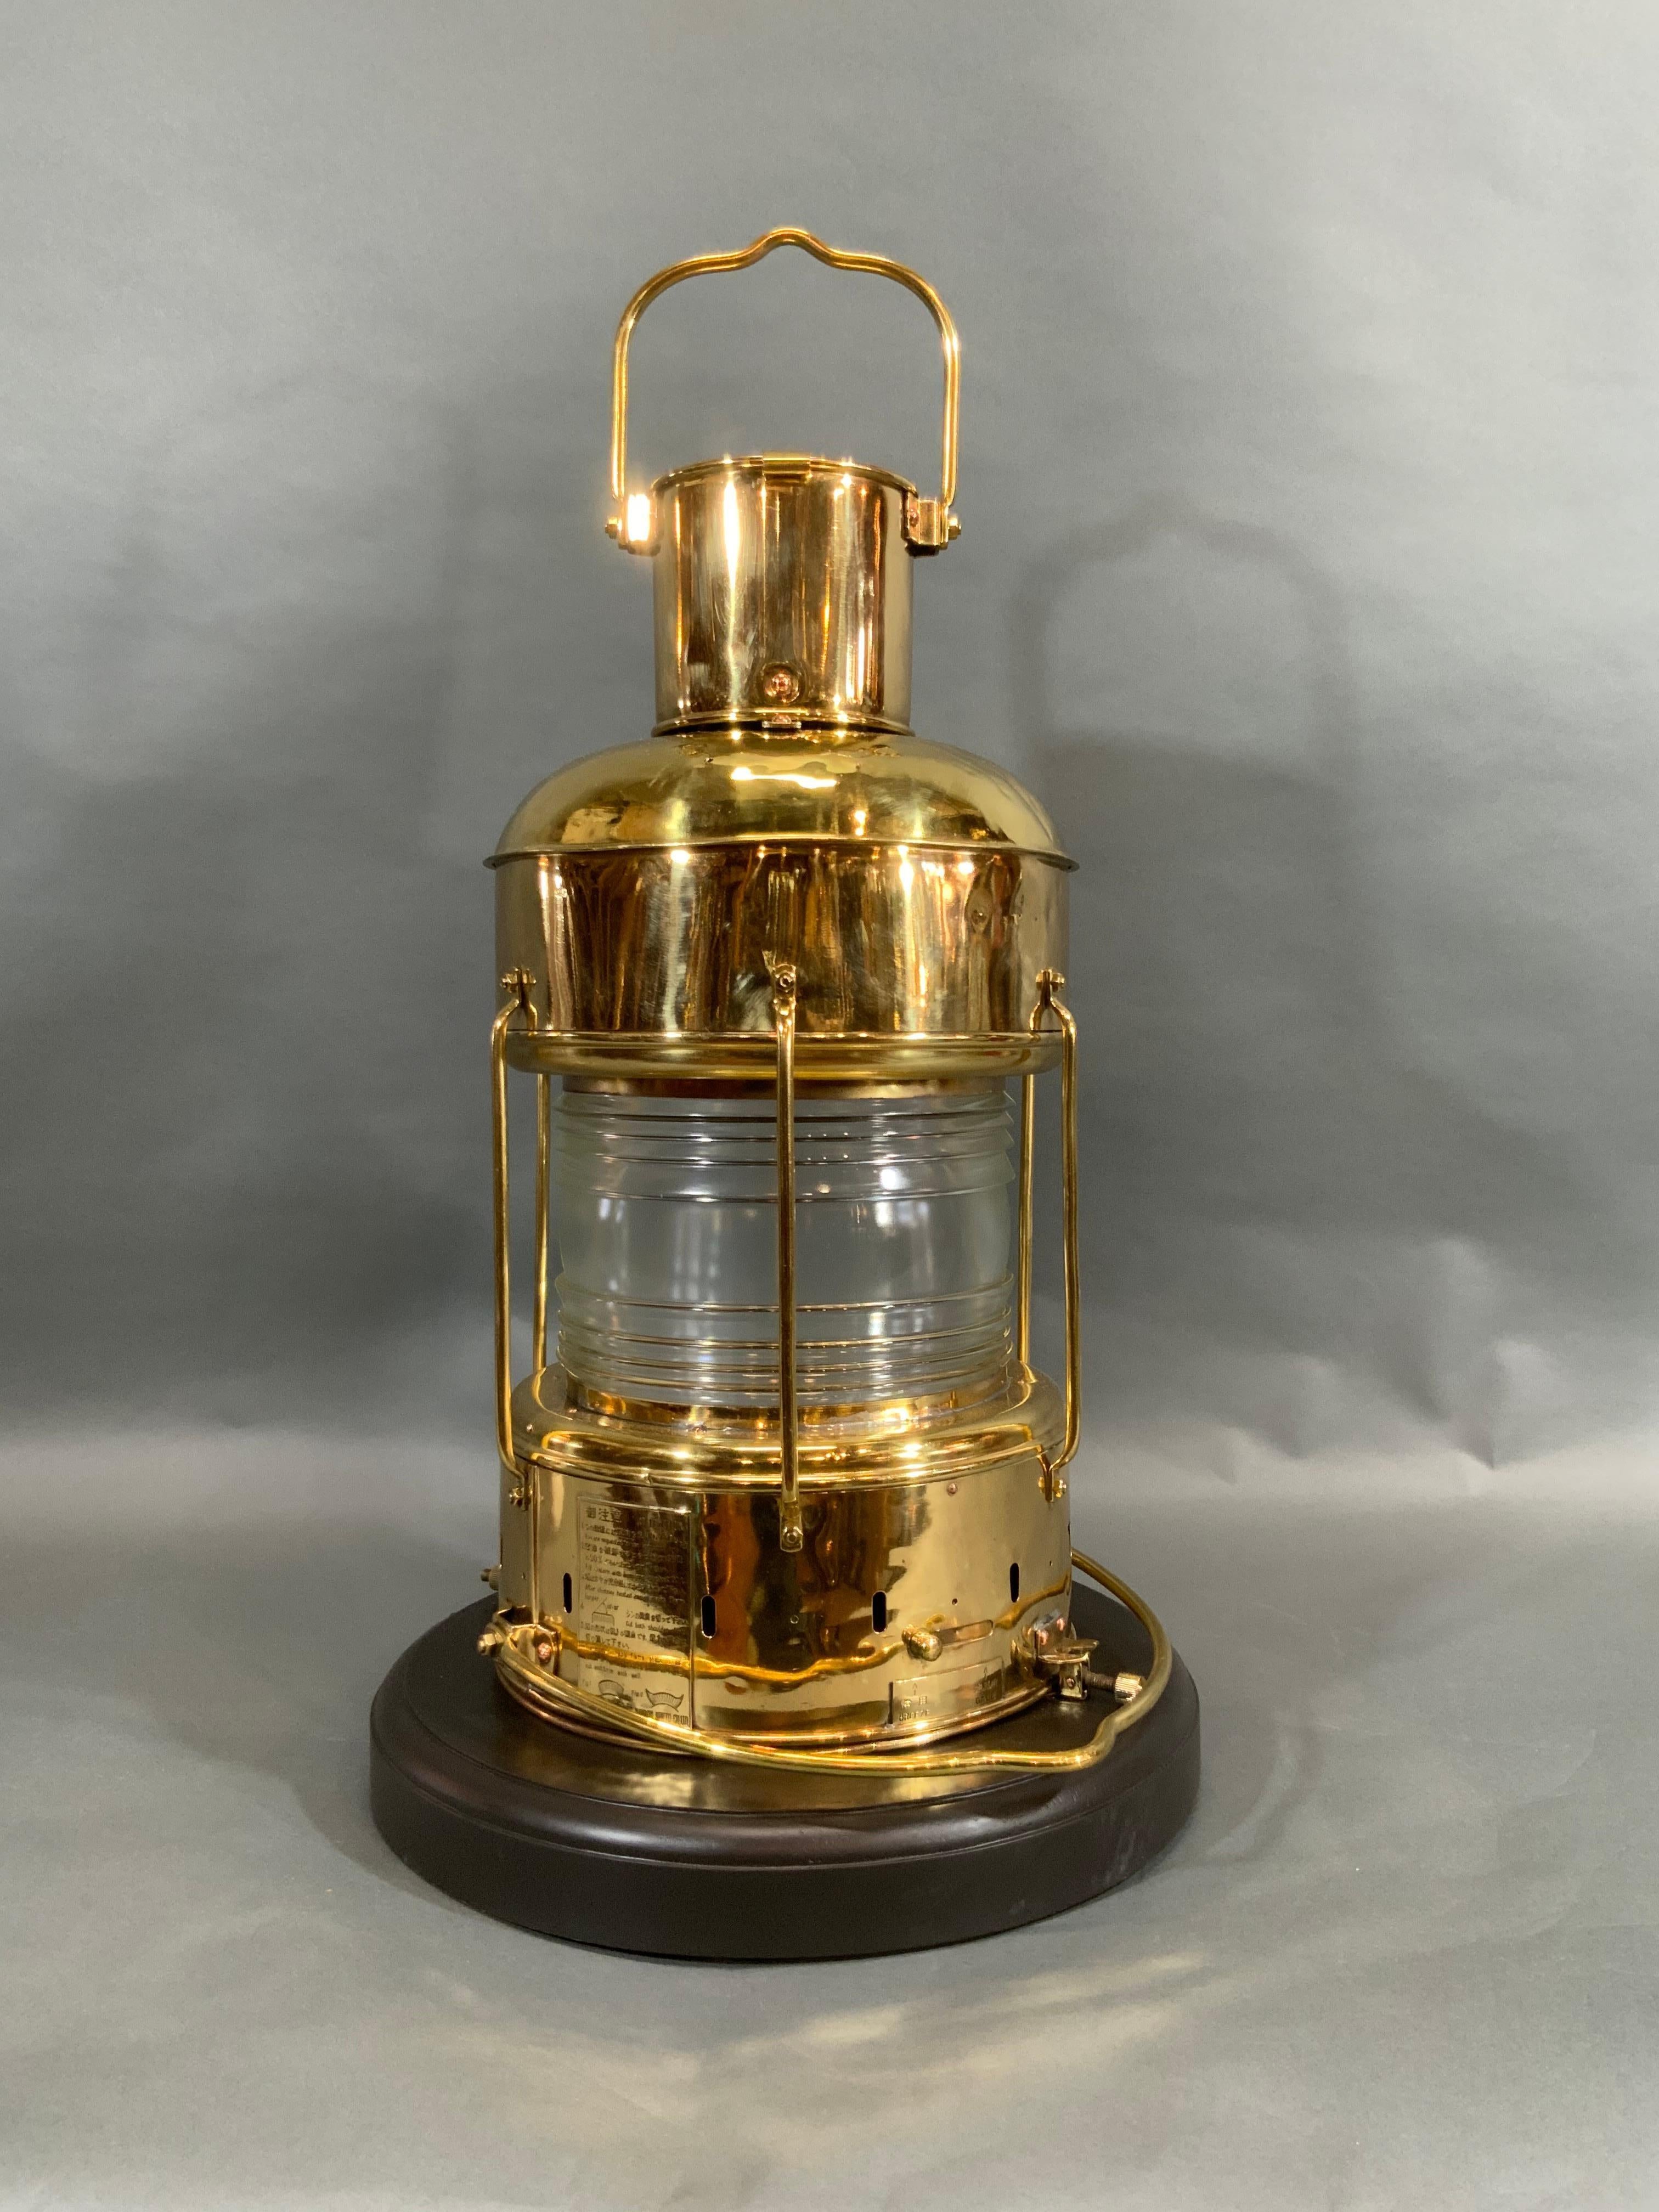 Ship's lantern, solid brass anchor lantern by Japanese maker Nippon Sento Co. LTD, Tokyo, Japan. Circa 1970. This was a back up emergency lantern from a supertanker in the event it lost all power. Glass Fresnel lens. Meticulously polished and